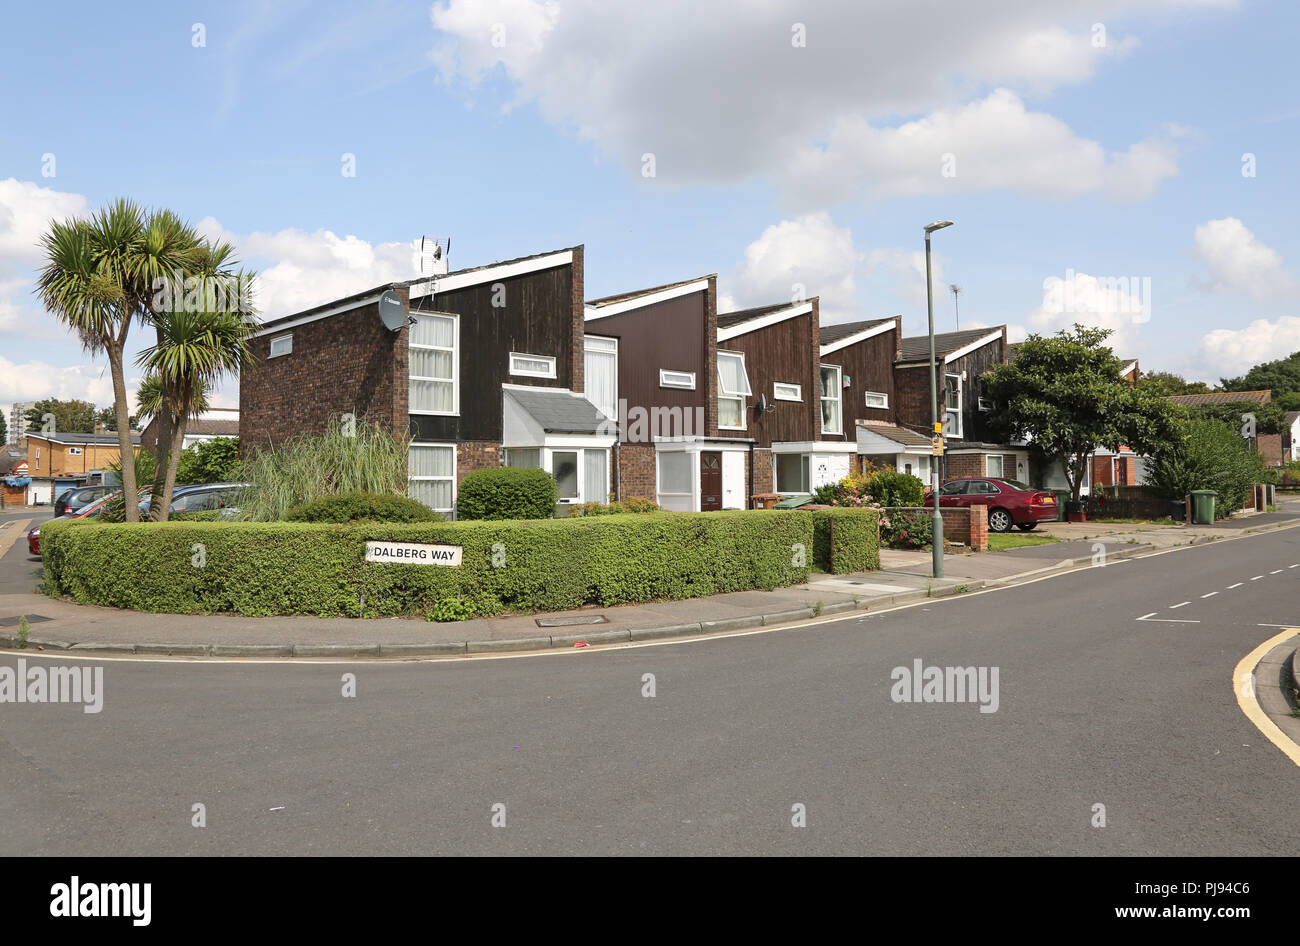 A row of 1980s built houses at Abbey Wood, southeast London, part of the Thamesmead development, famous for its 1960s concrete tenements. Stock Photo